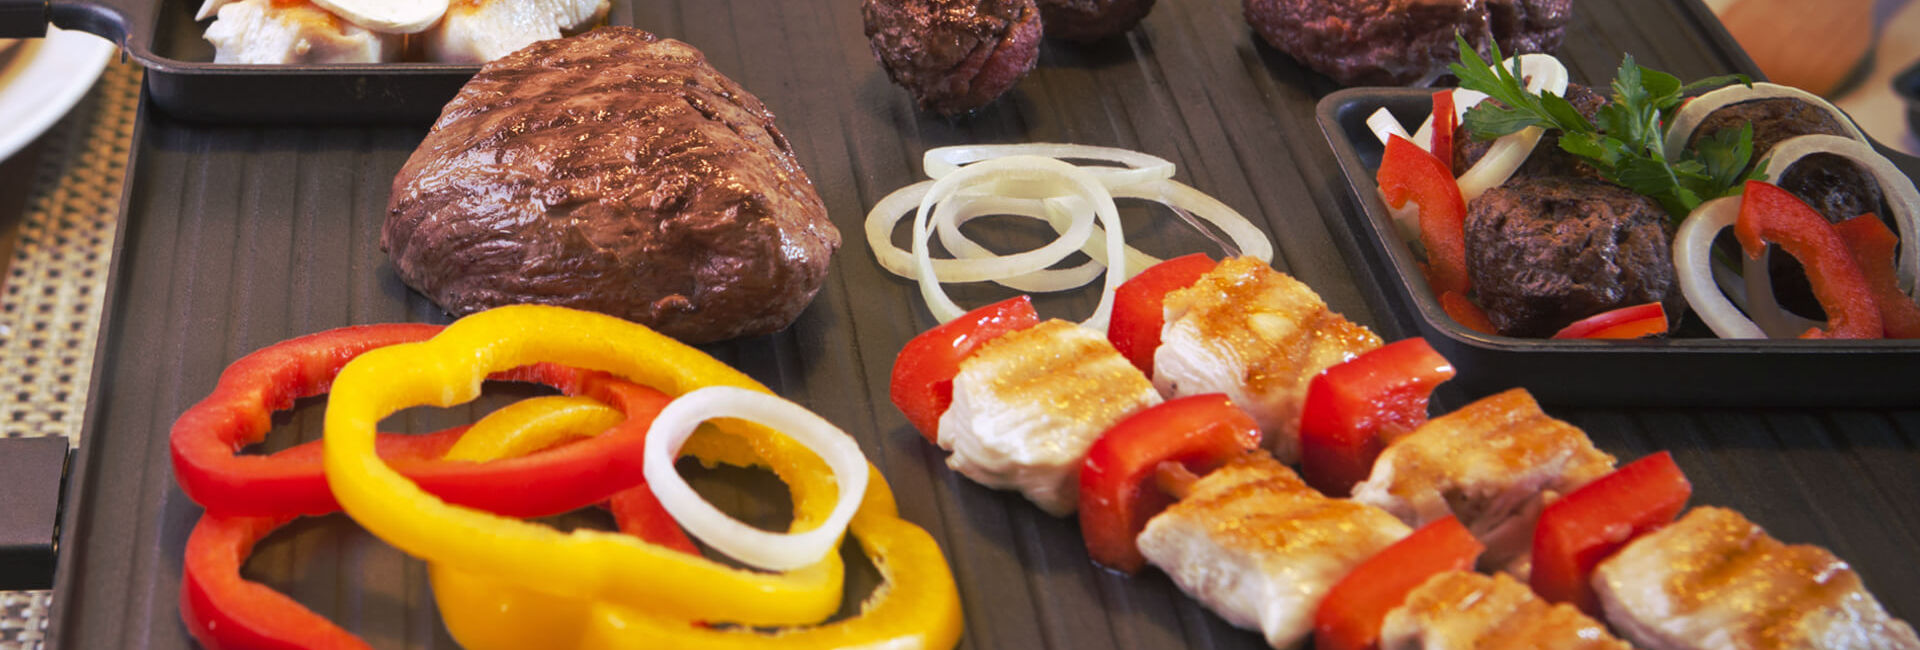 Gourmet with meat, union and peppers - Grill Tasting package Gasterij 't Karrewiel